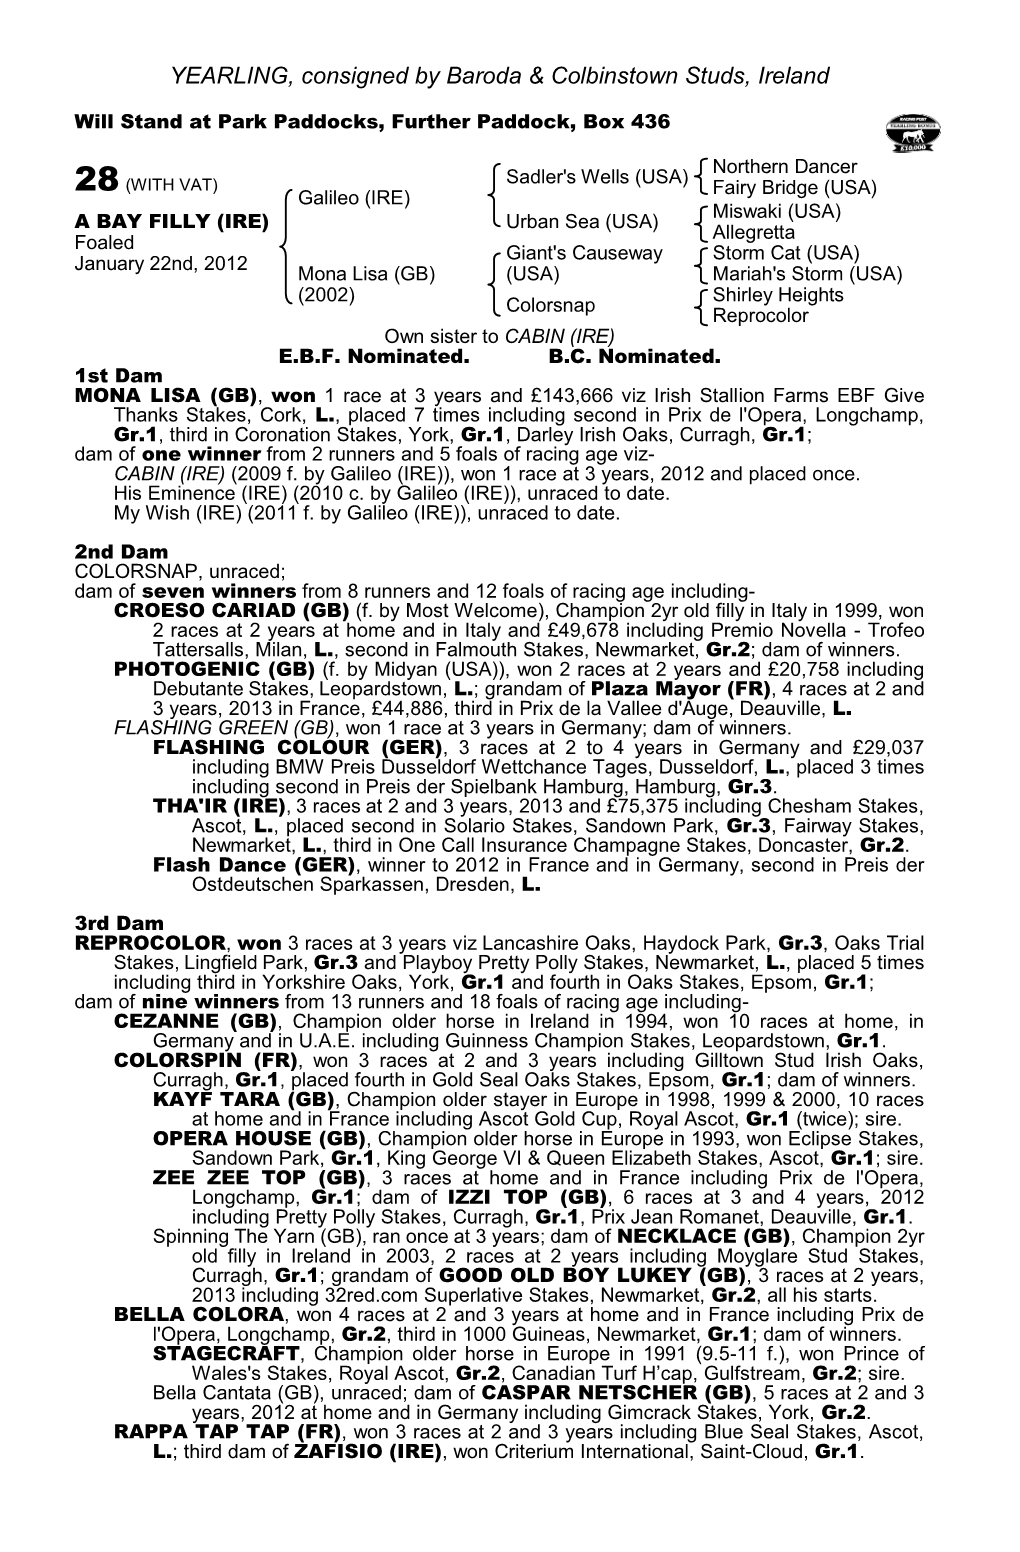 YEARLING, Consigned by Baroda & Colbinstown Studs, Ireland